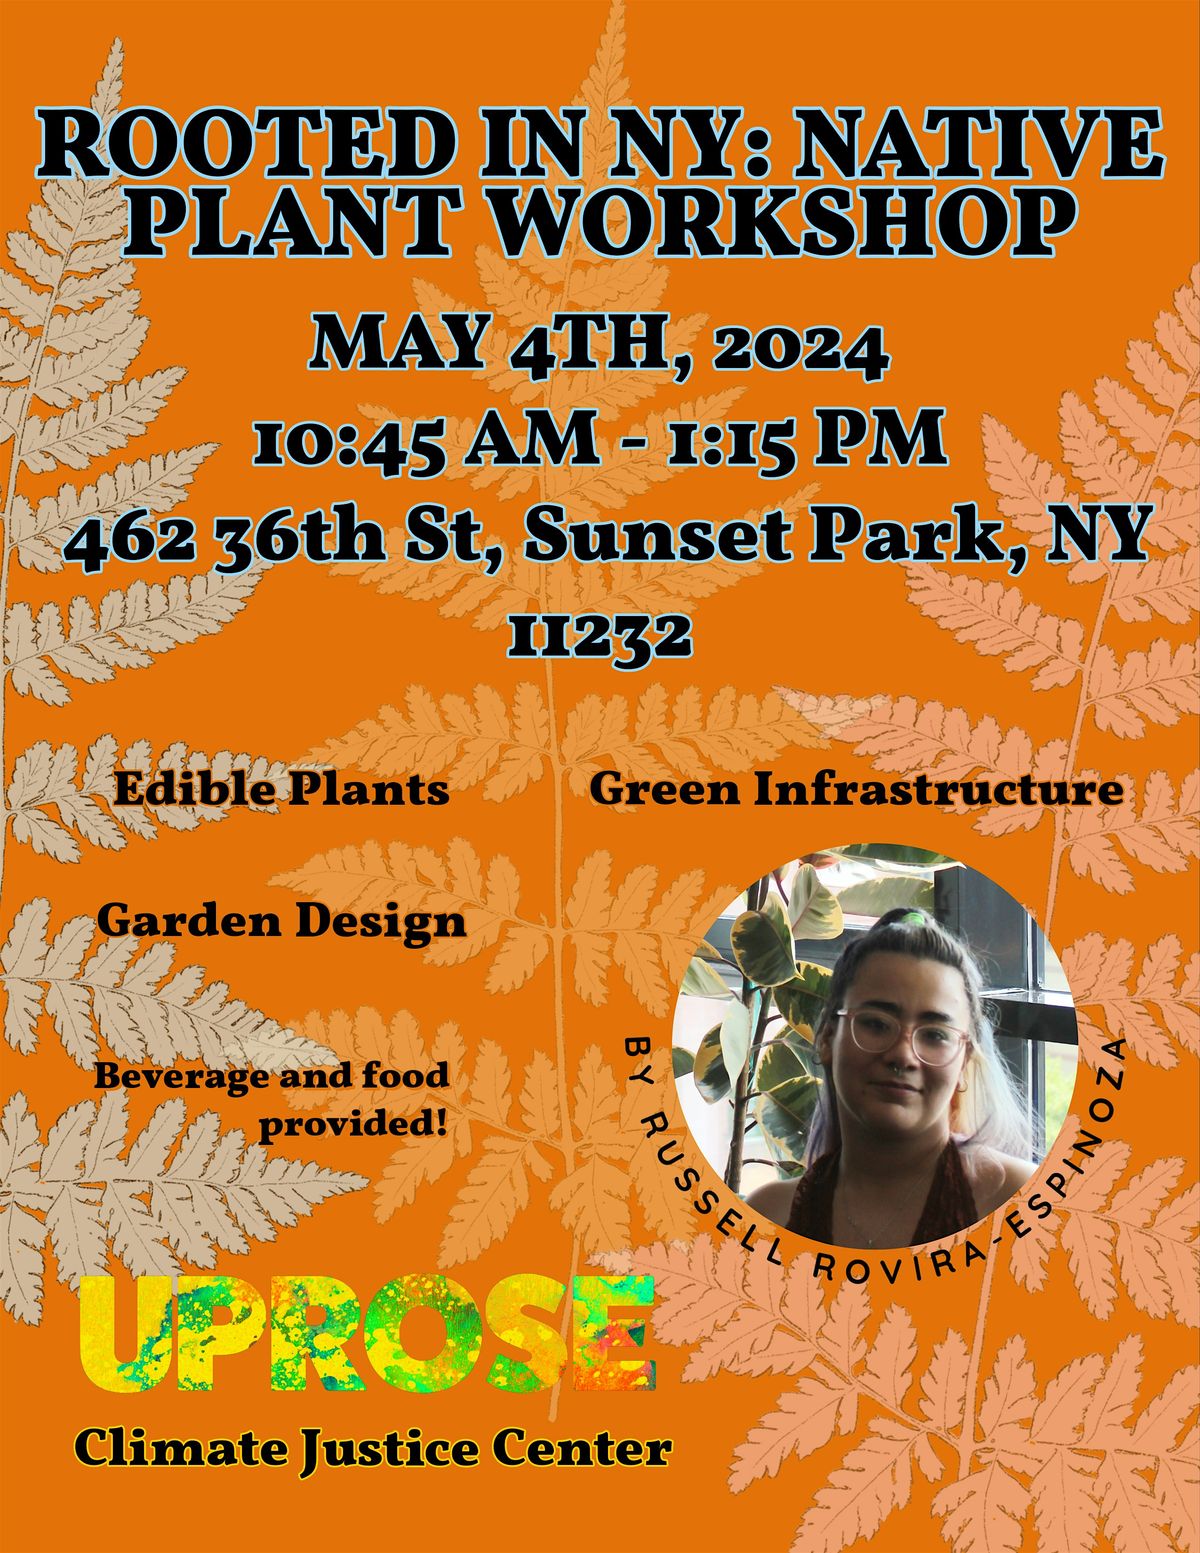 Rooted in New York: Native Plant Workshop by Russell Rovira-Espinoza